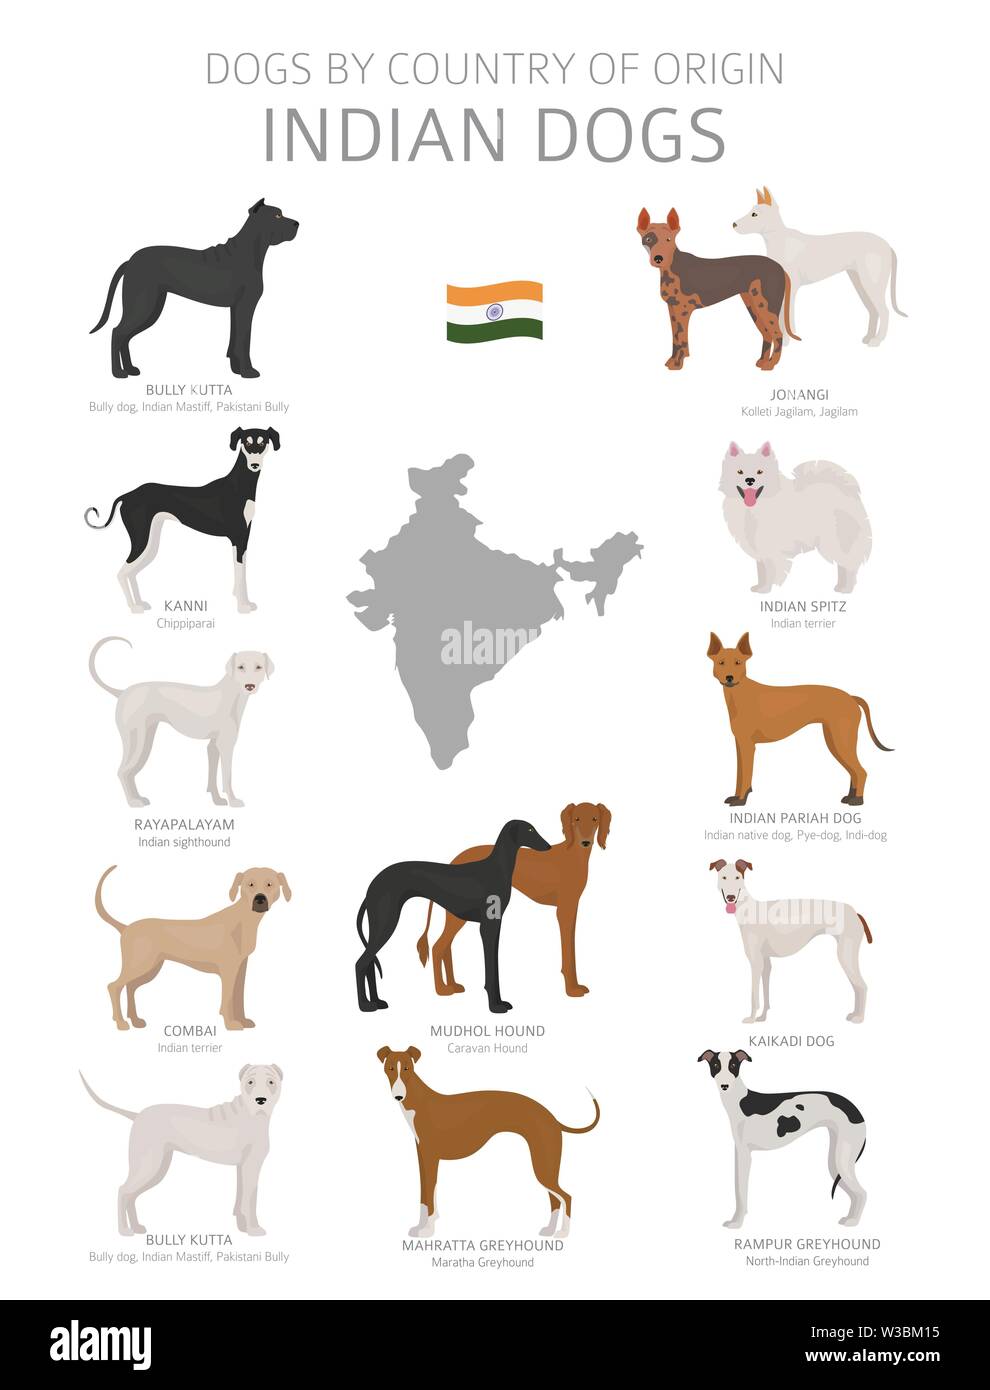 Dogs By Country Of Origin Indian Dog Breeds Shepherds Hunting Herding Toy Working And Service Dogs Set Vector Illustration Stock Vector Image Art Alamy